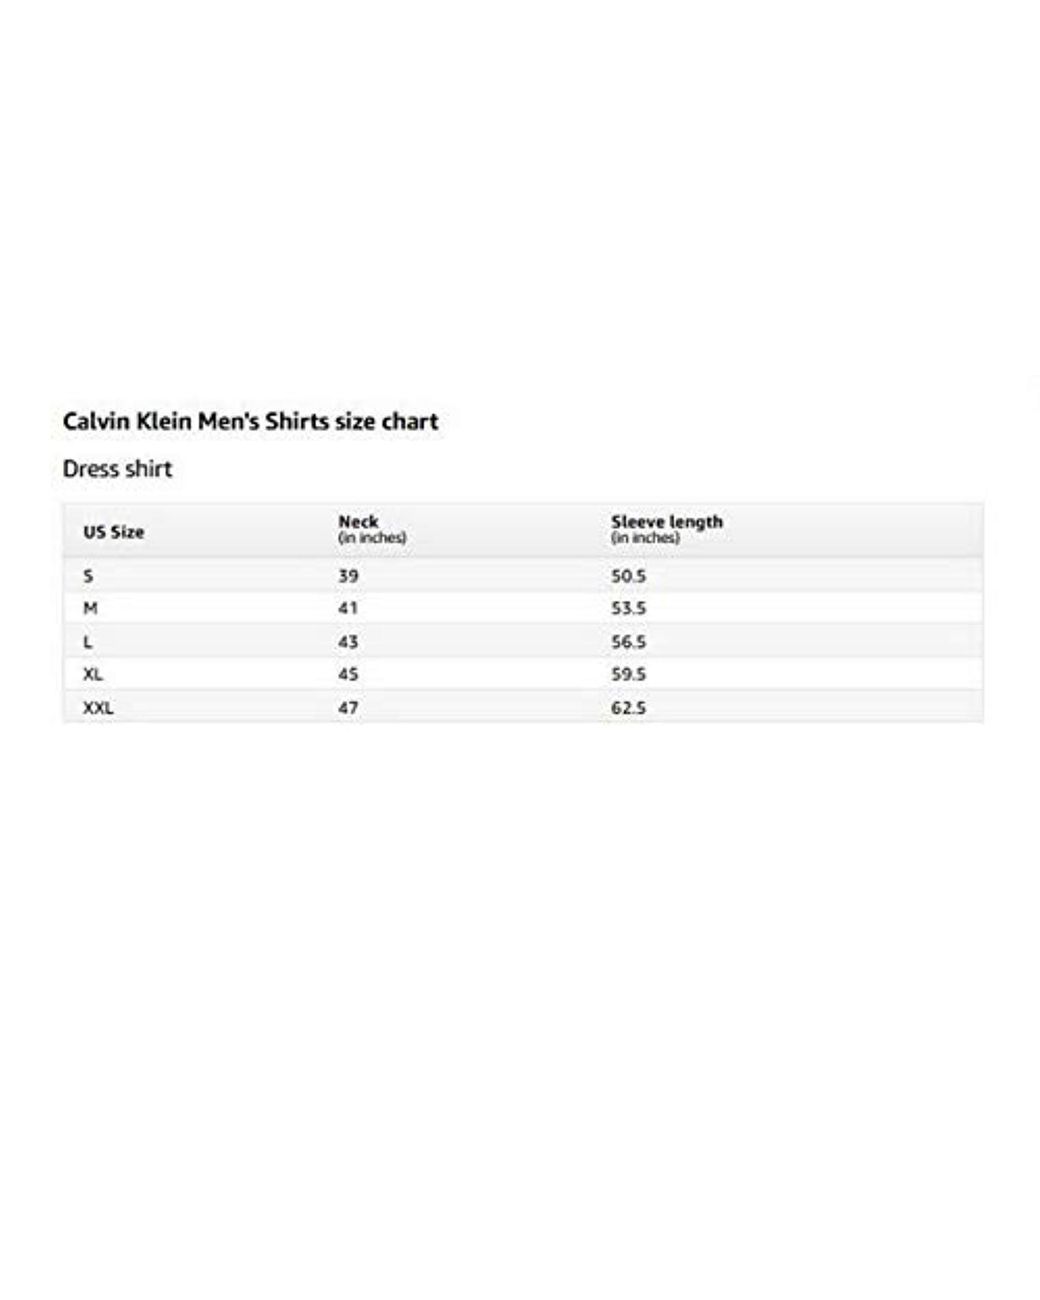 Calvin Klein Ultimate Skinny Jeans Size Chart